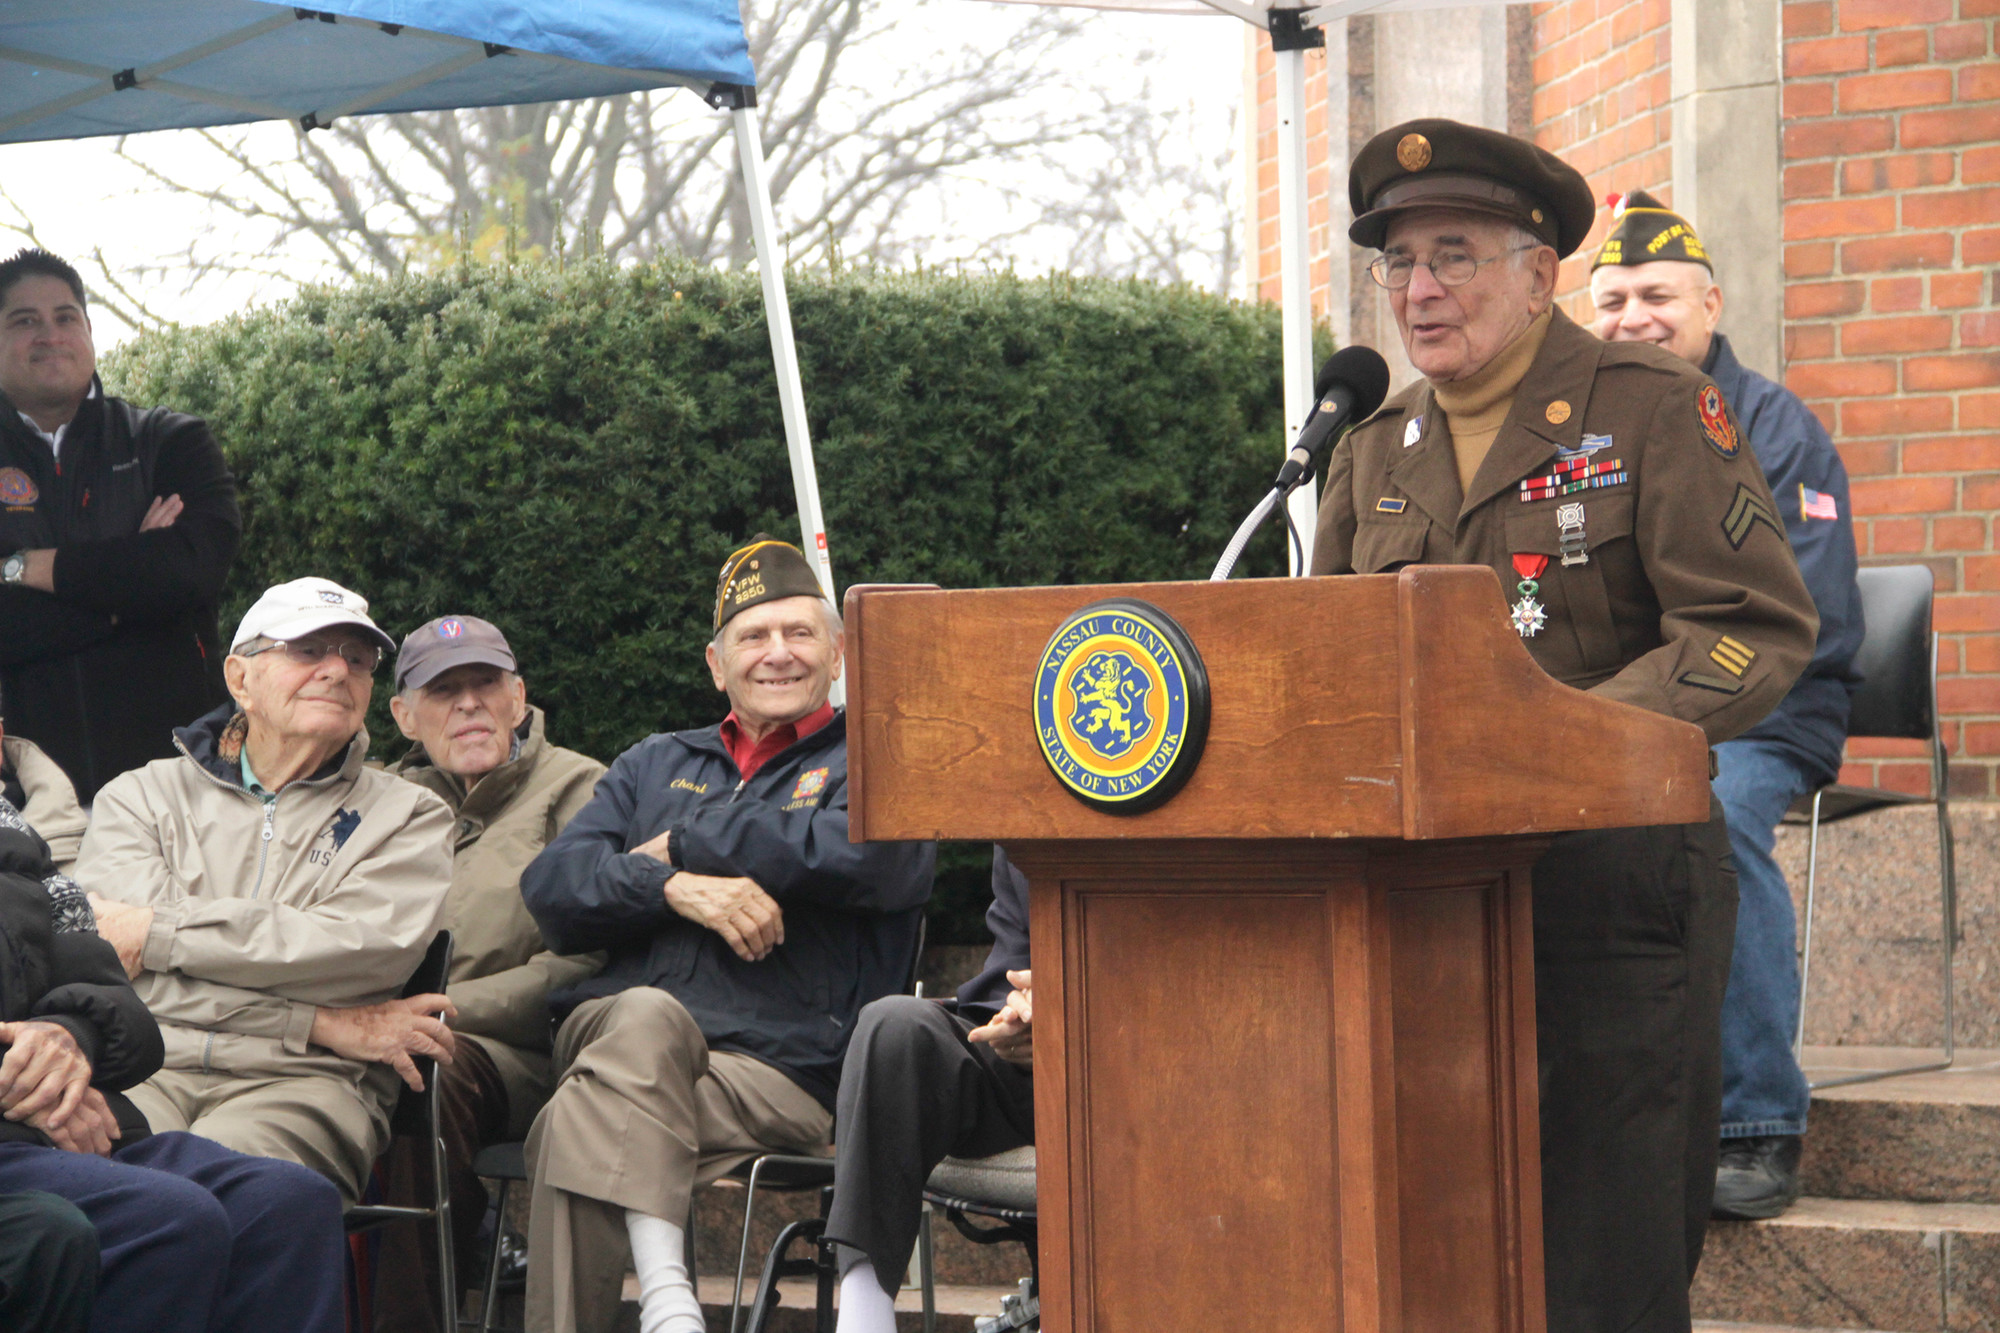 Veteran David Marshall, a Baldwinite whose most vivid memory of the historic Battle of the Bulge was the frigid Belgian winter, spoke at the unveiling event on Dec. 23.